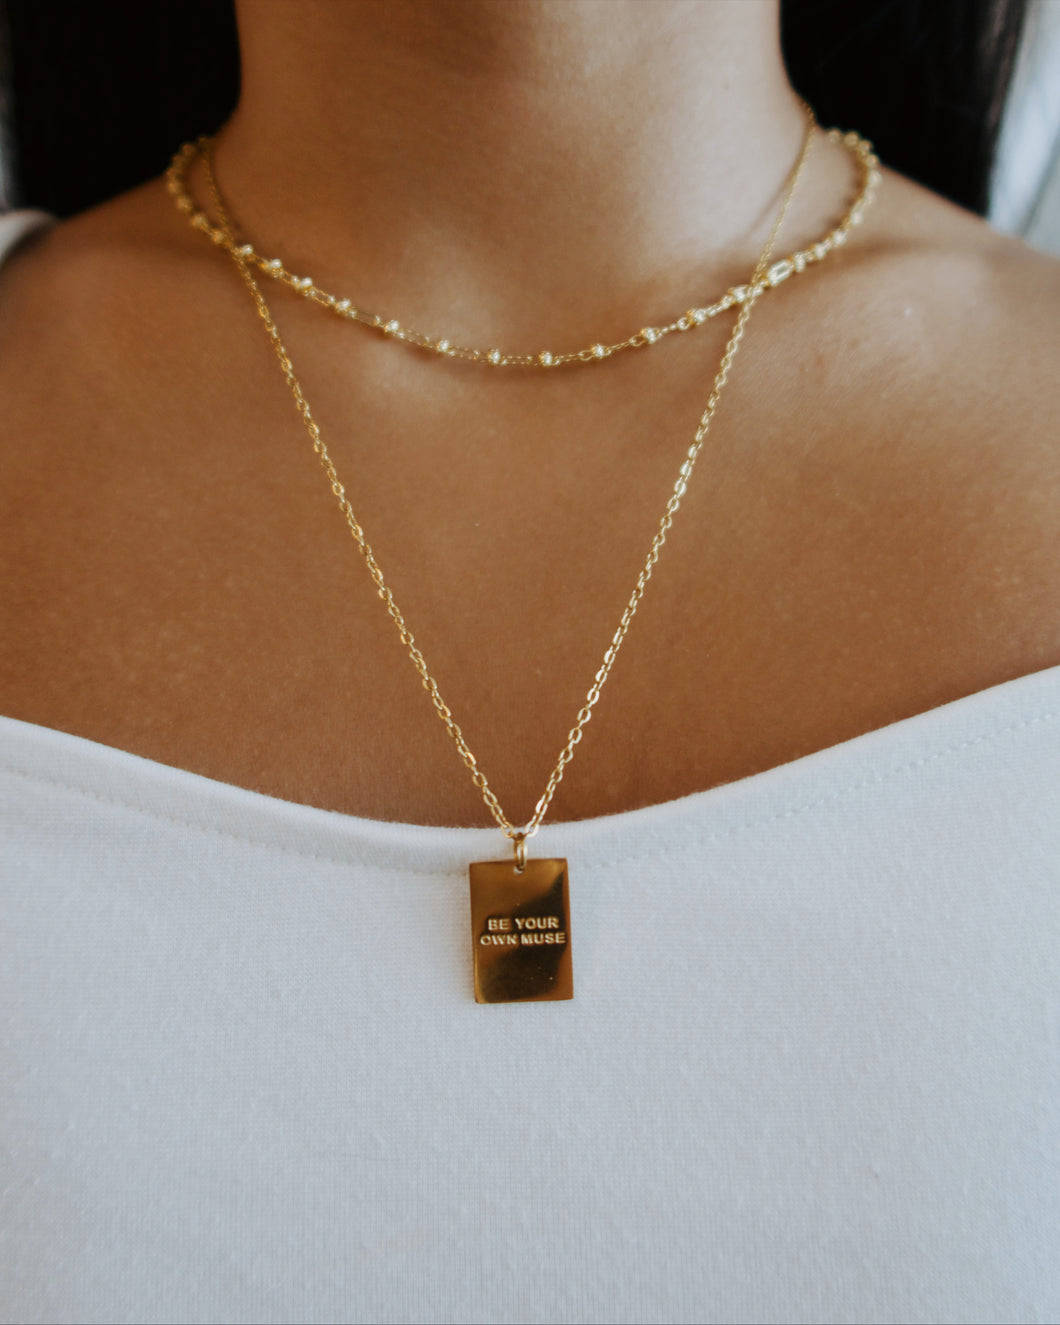 Be Your Own Muse Necklace